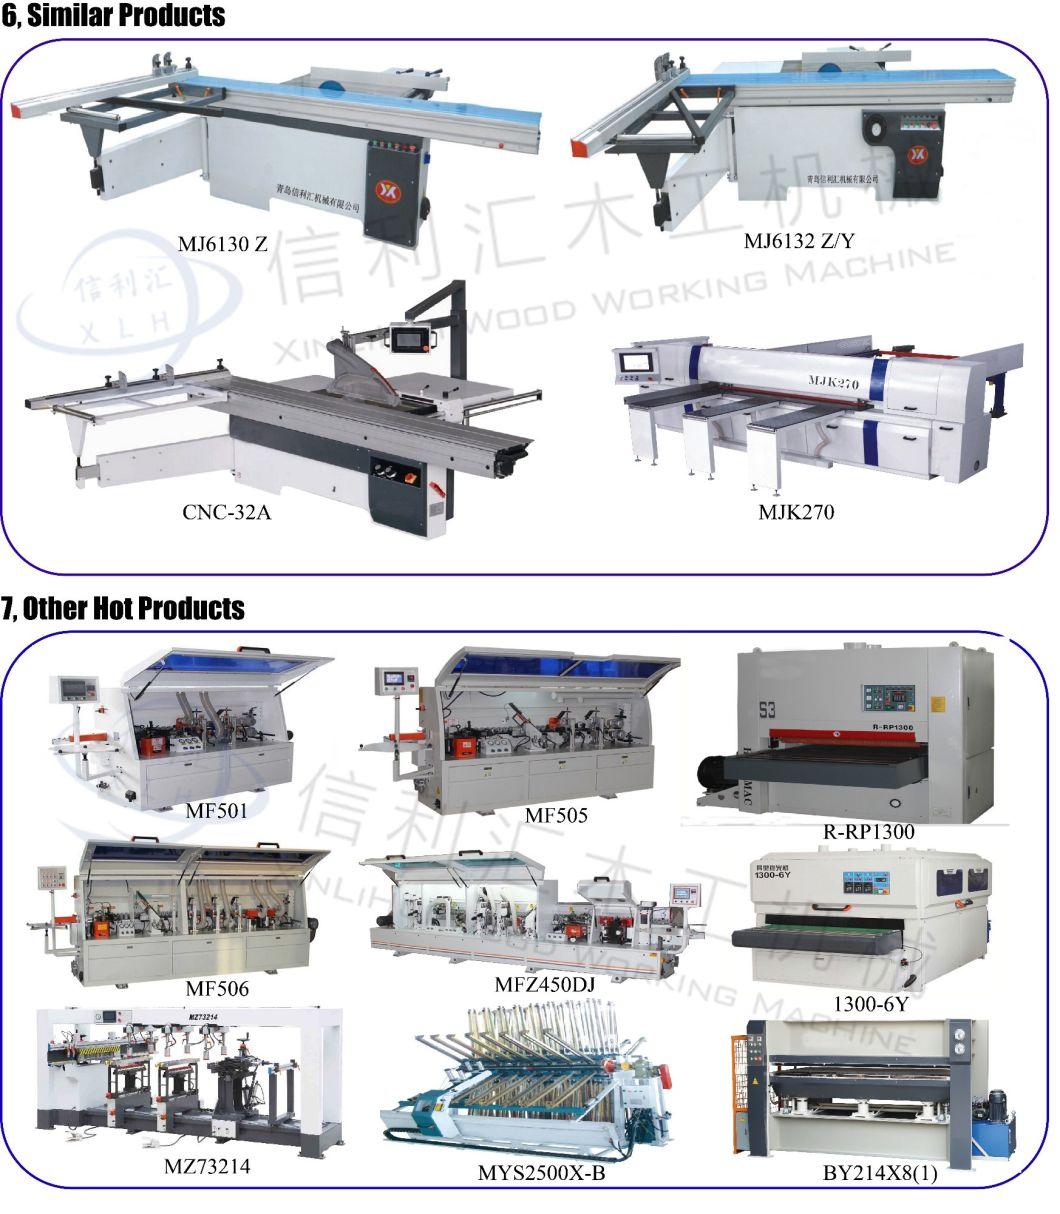 Numerical Controlled Panel Saw Machine with Touch Screen Easy Operation/ Sierra Circular De Mesa Timber Processing Machine Saw with Roller Rail Sliding Table